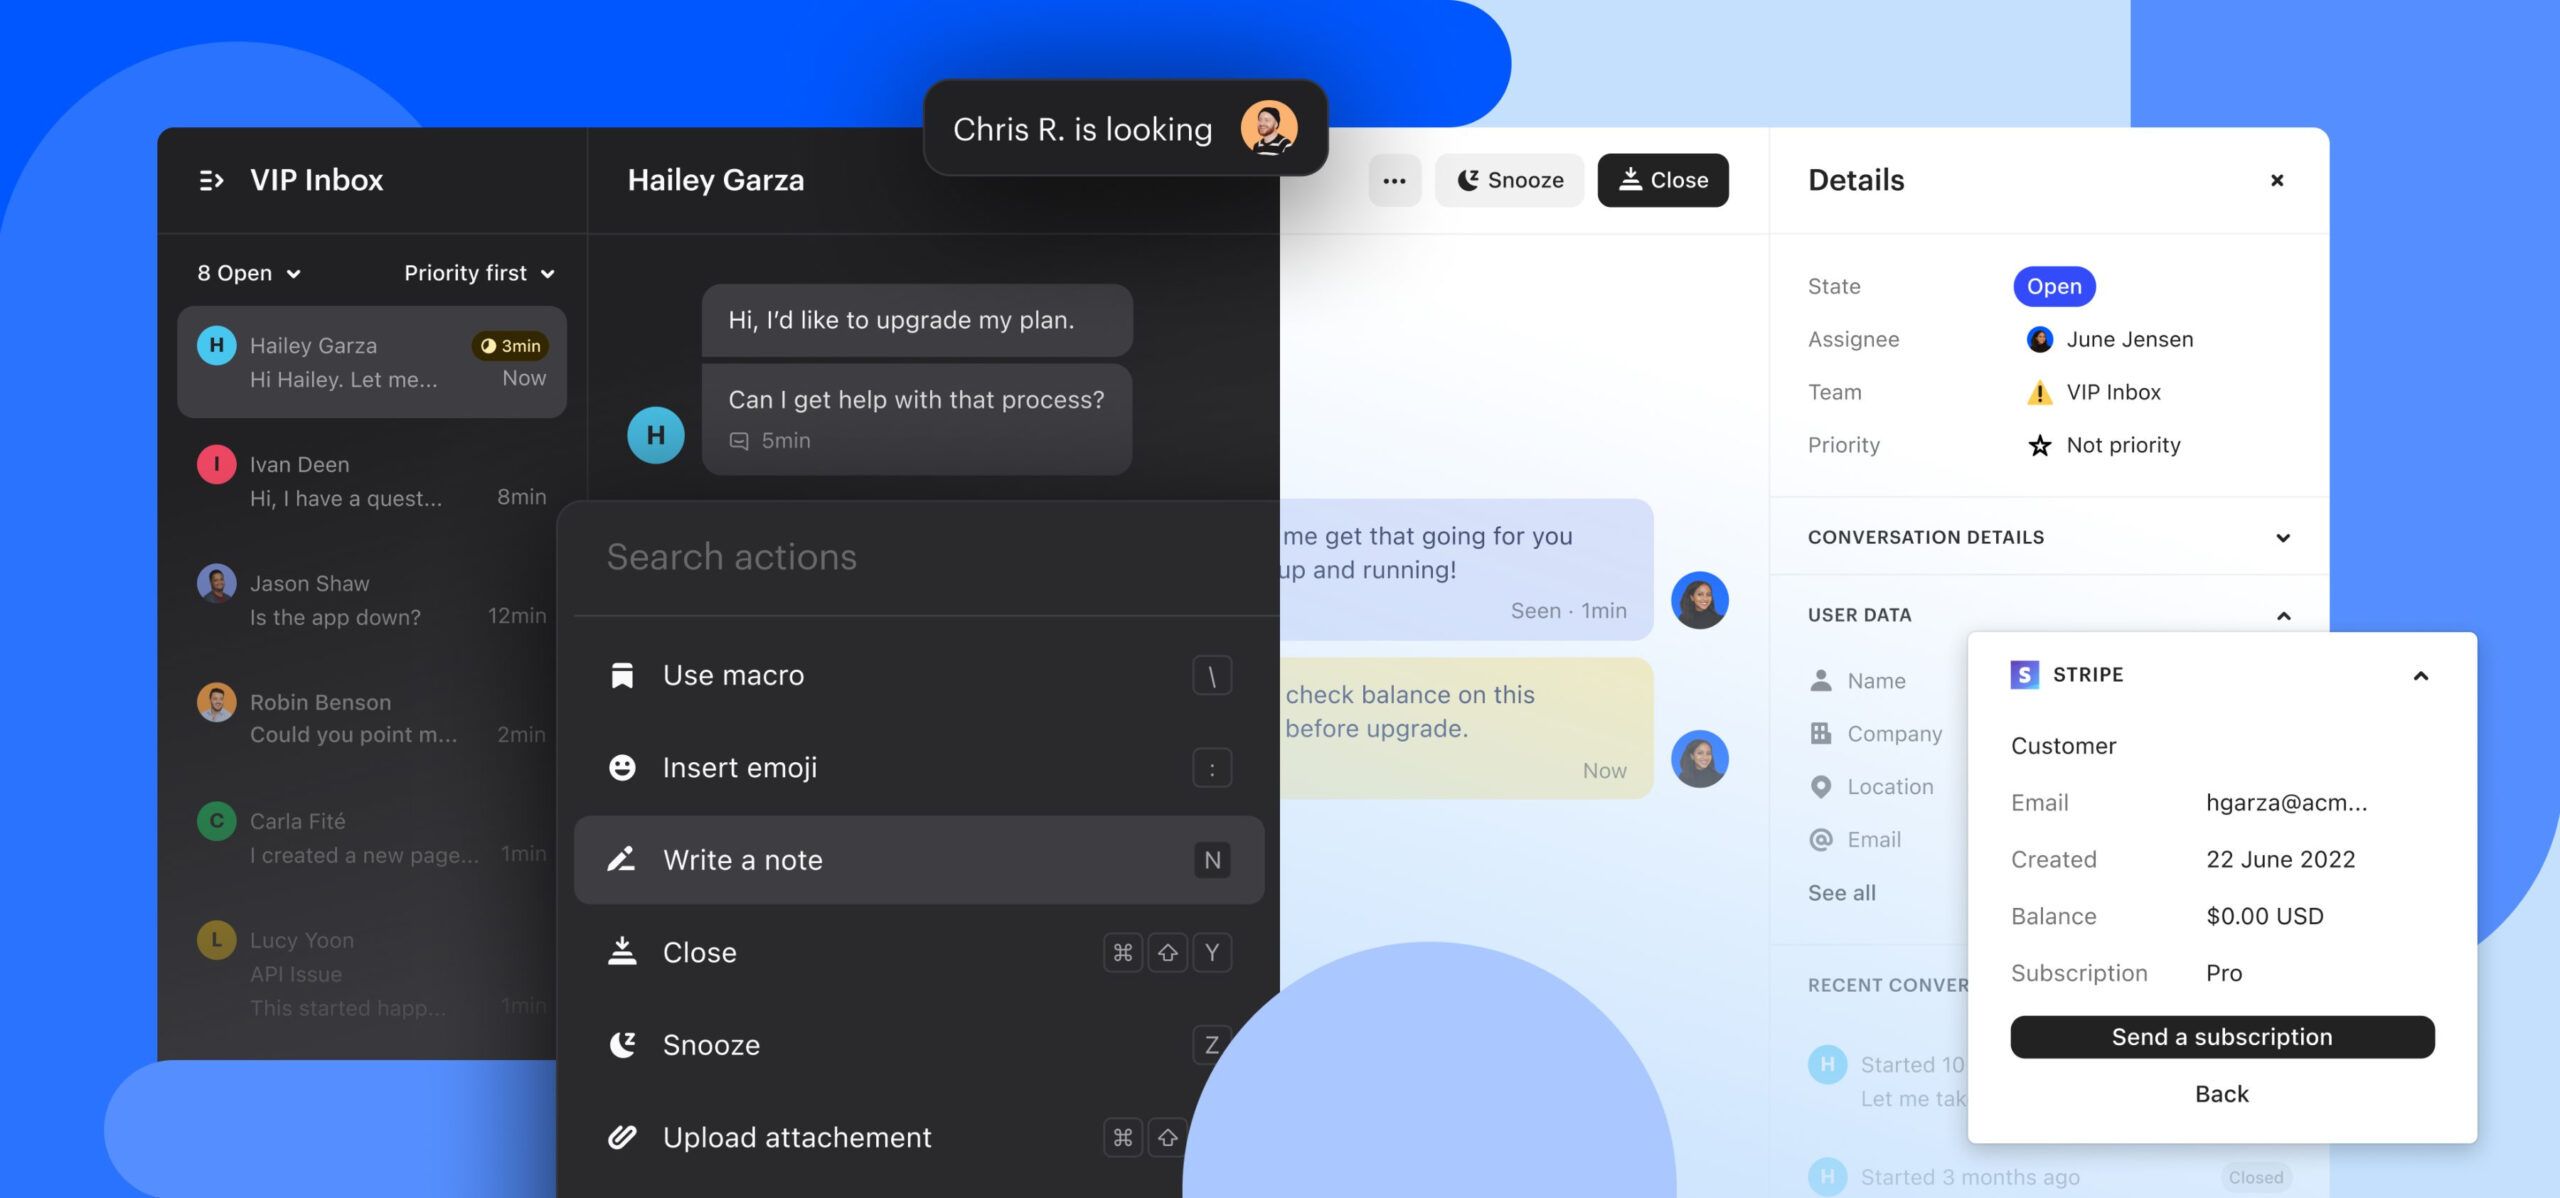 Announcing Intercom’s new Inbox: The fastest and most powerful inbox designed for scale